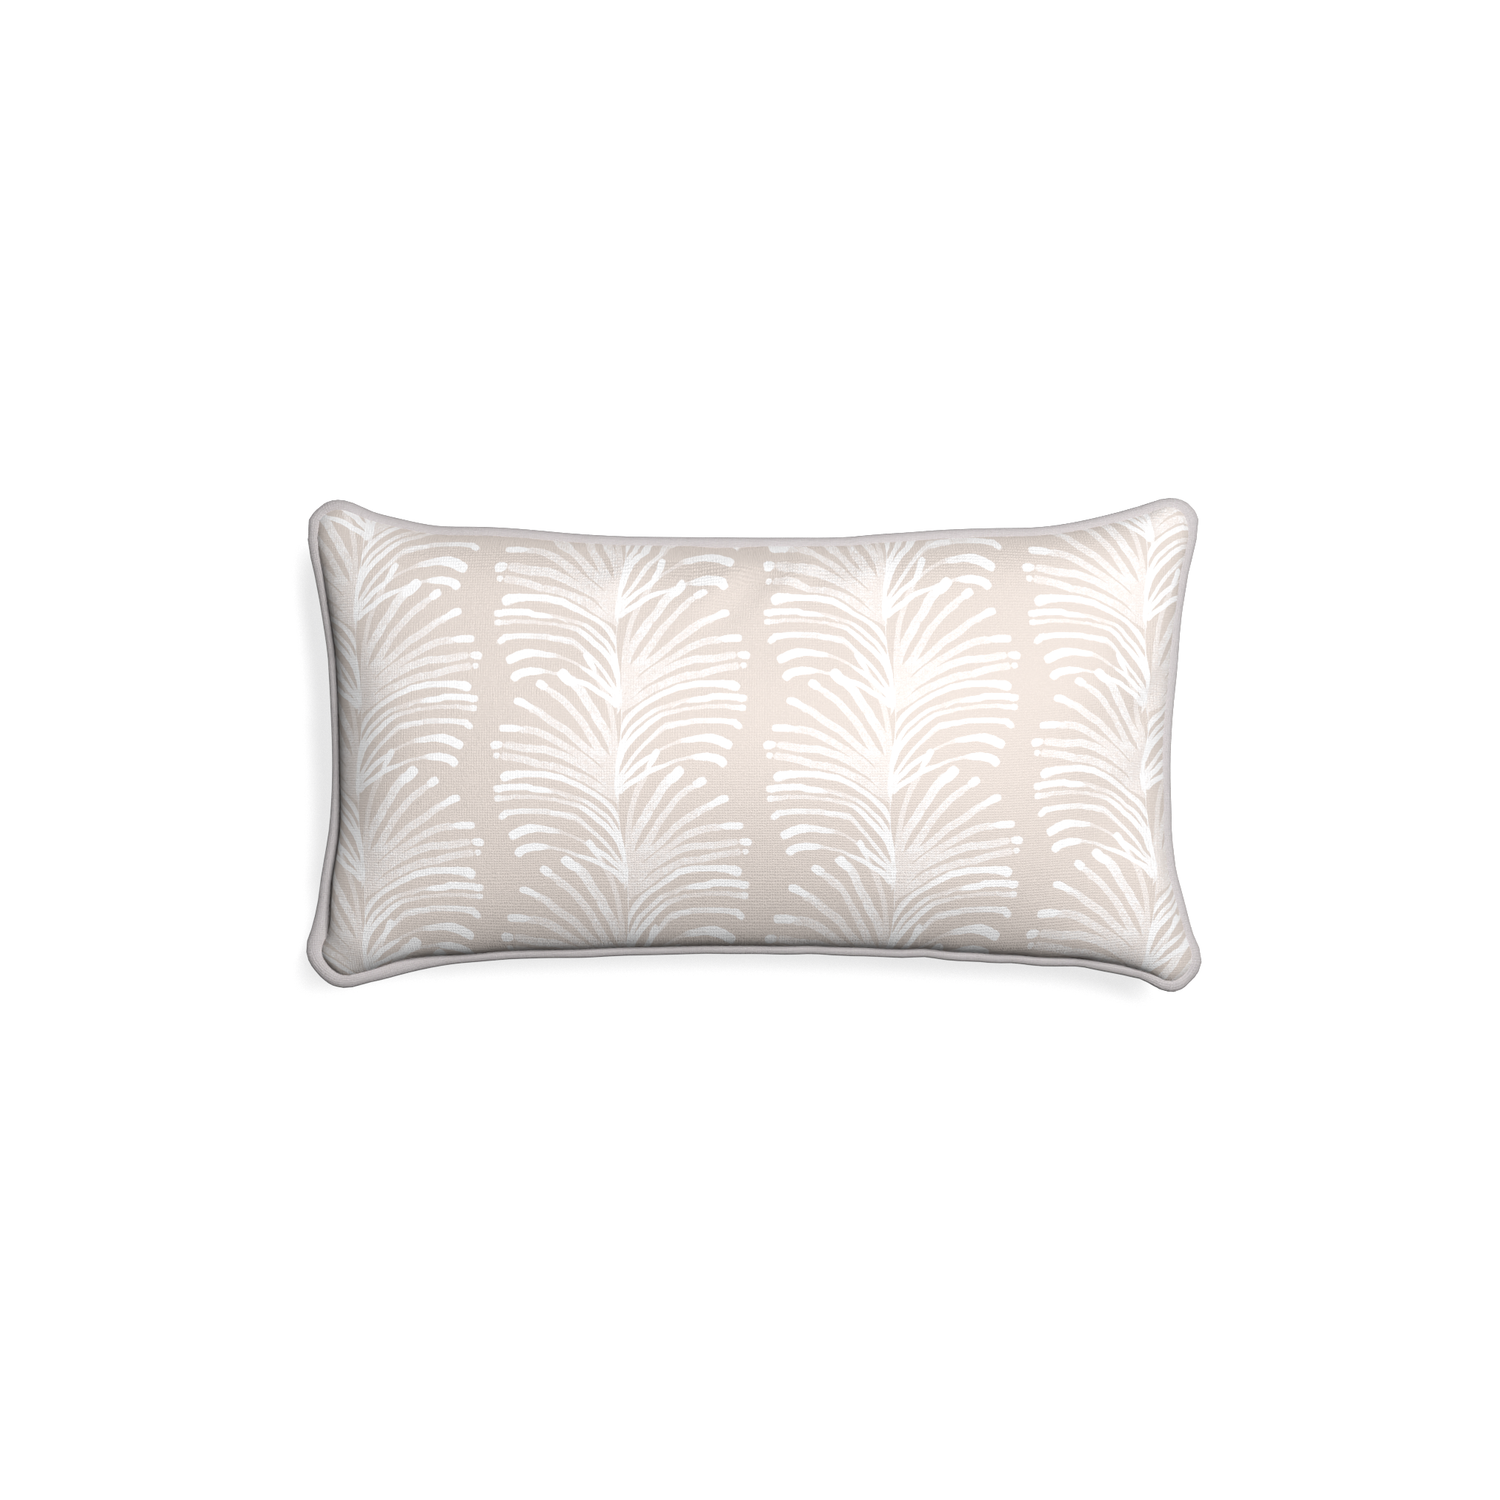 Petite-lumbar emma sand custom sand colored botanical stripepillow with pebble piping on white background